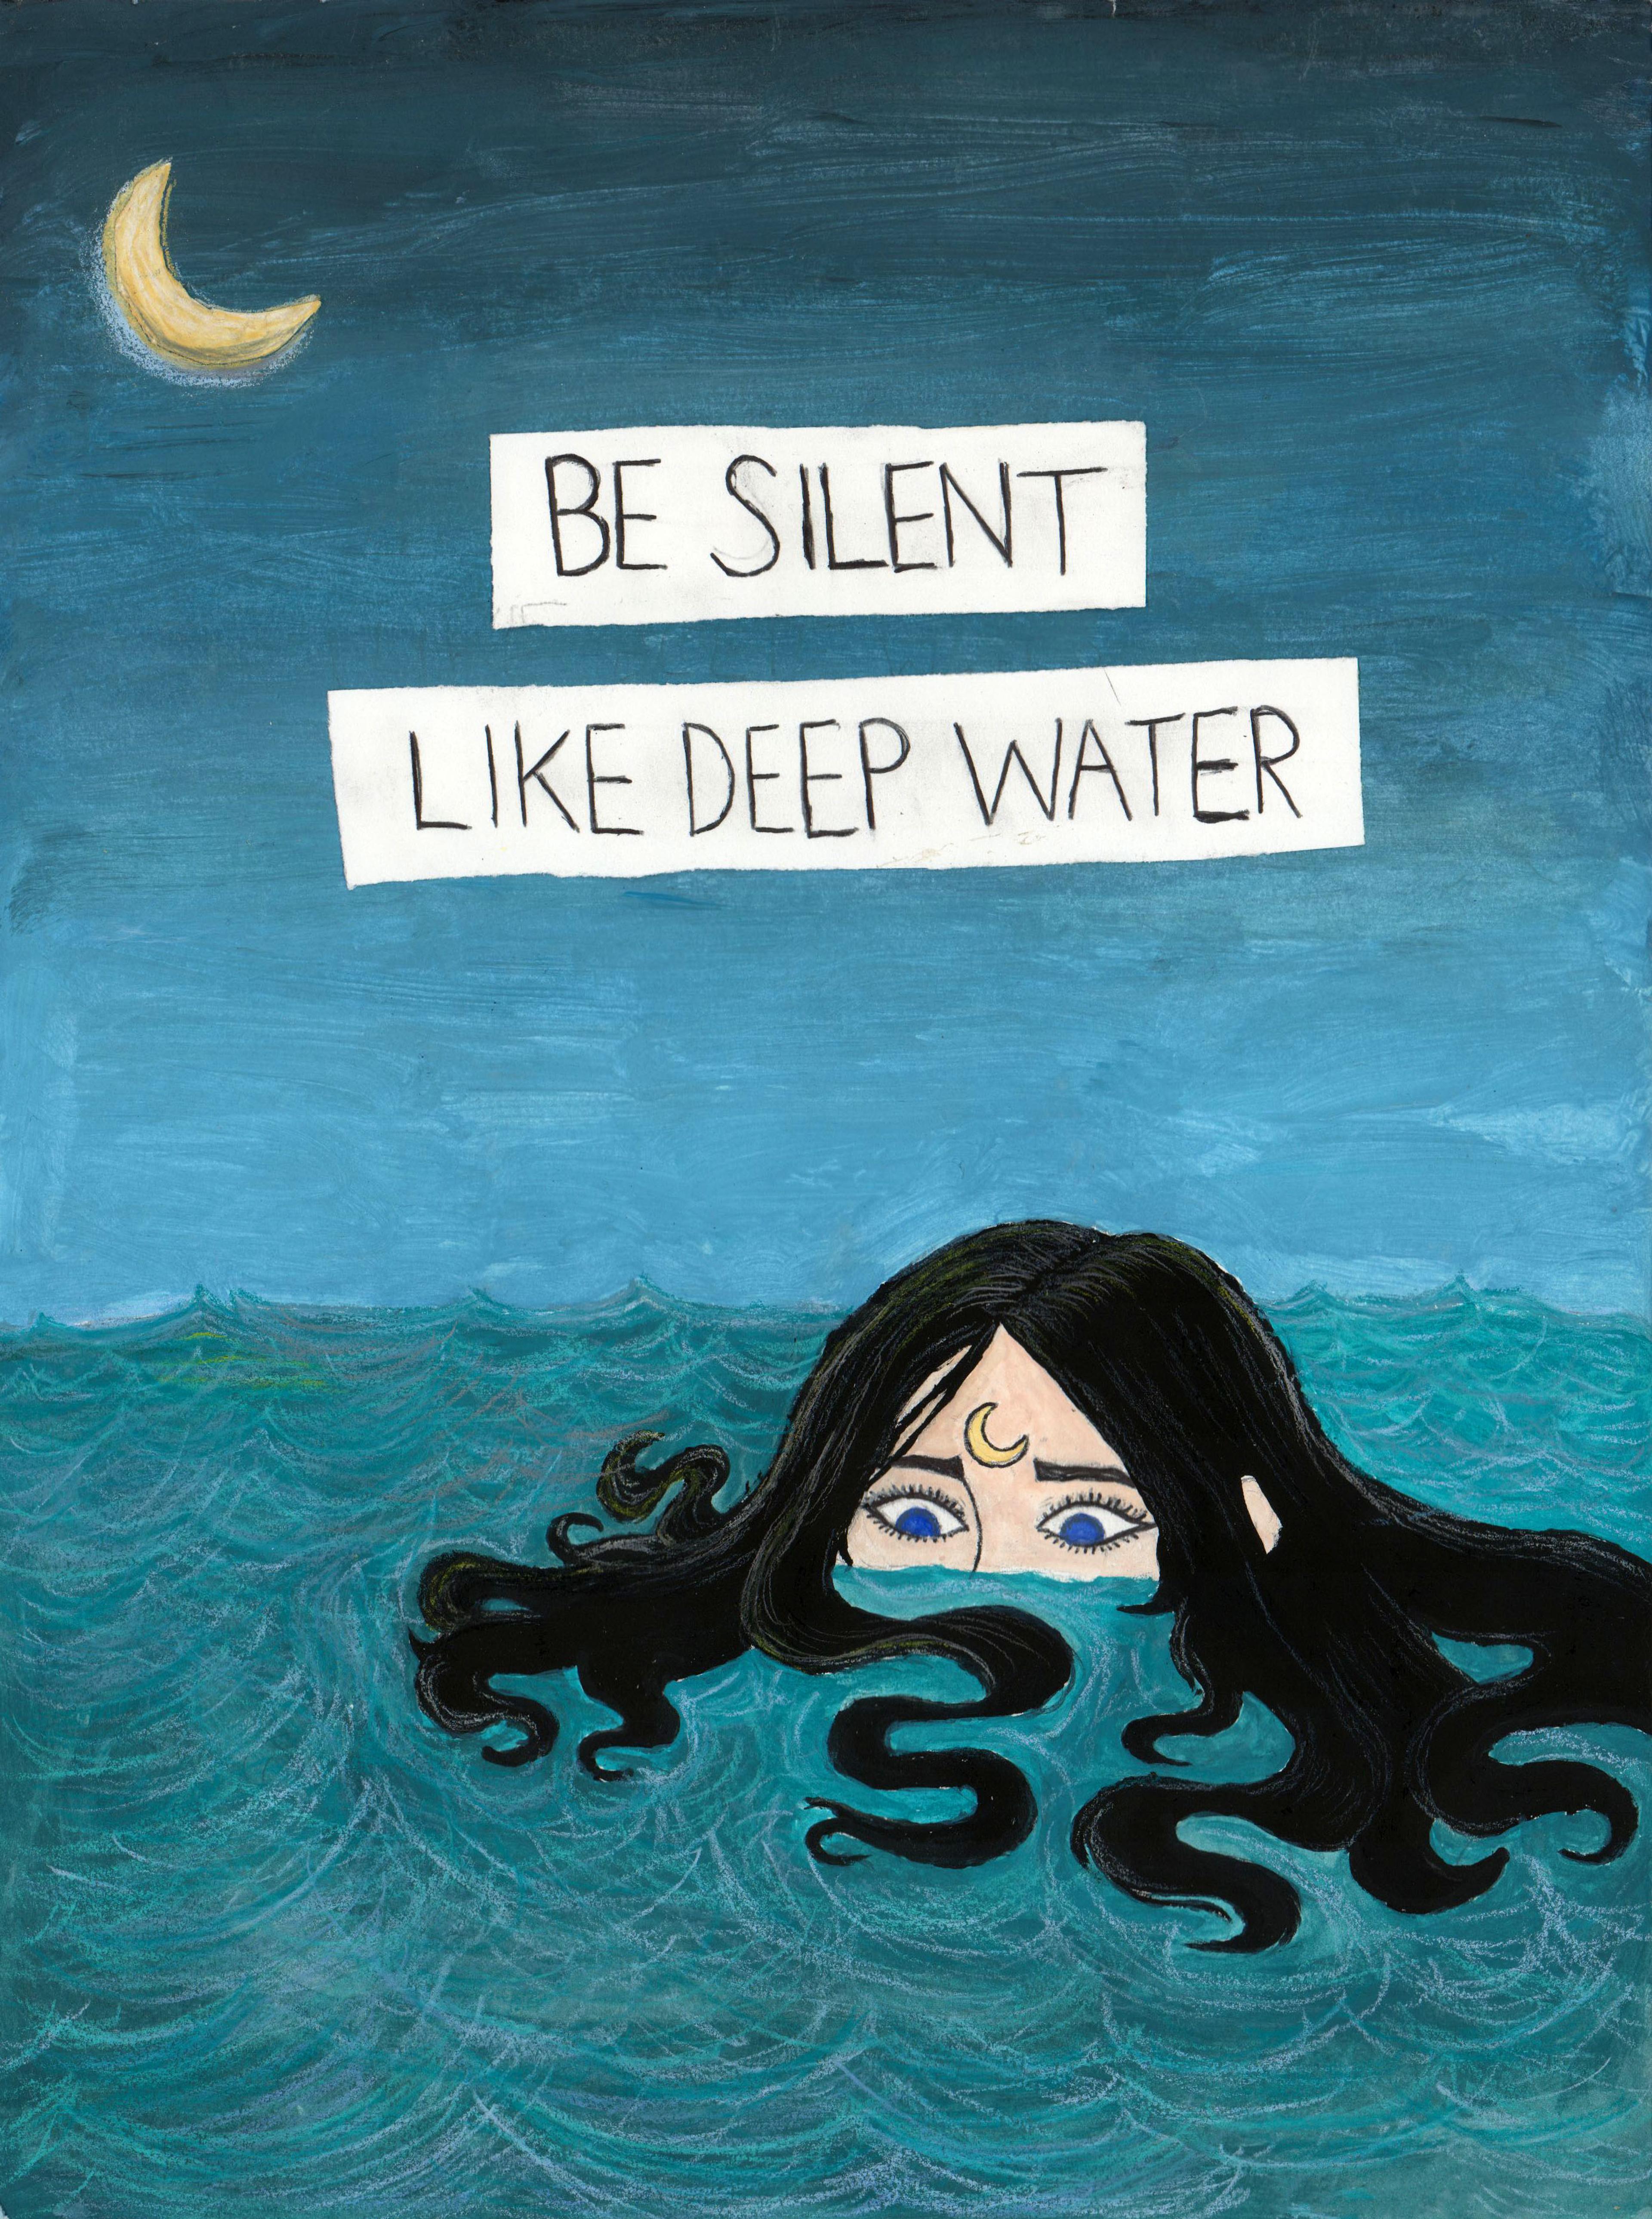 Illustration of an adolescent girl made with watercolor, Prismacolors, tempera, and paper. The girl, who has long black wavy hair, is submerged in a wavy teal ocean to just below her large blue eyes, which stare down at the water around her. A crescent moon is drawn across her forehead between her eyebrows, and a crescent moon also appears in the dark blue night sky at the top left corner of the image. Two white horizontal bars appear above the girl's head with a caption in black capital letters that reads, "BE SILENT LIKE DEEP WATER."